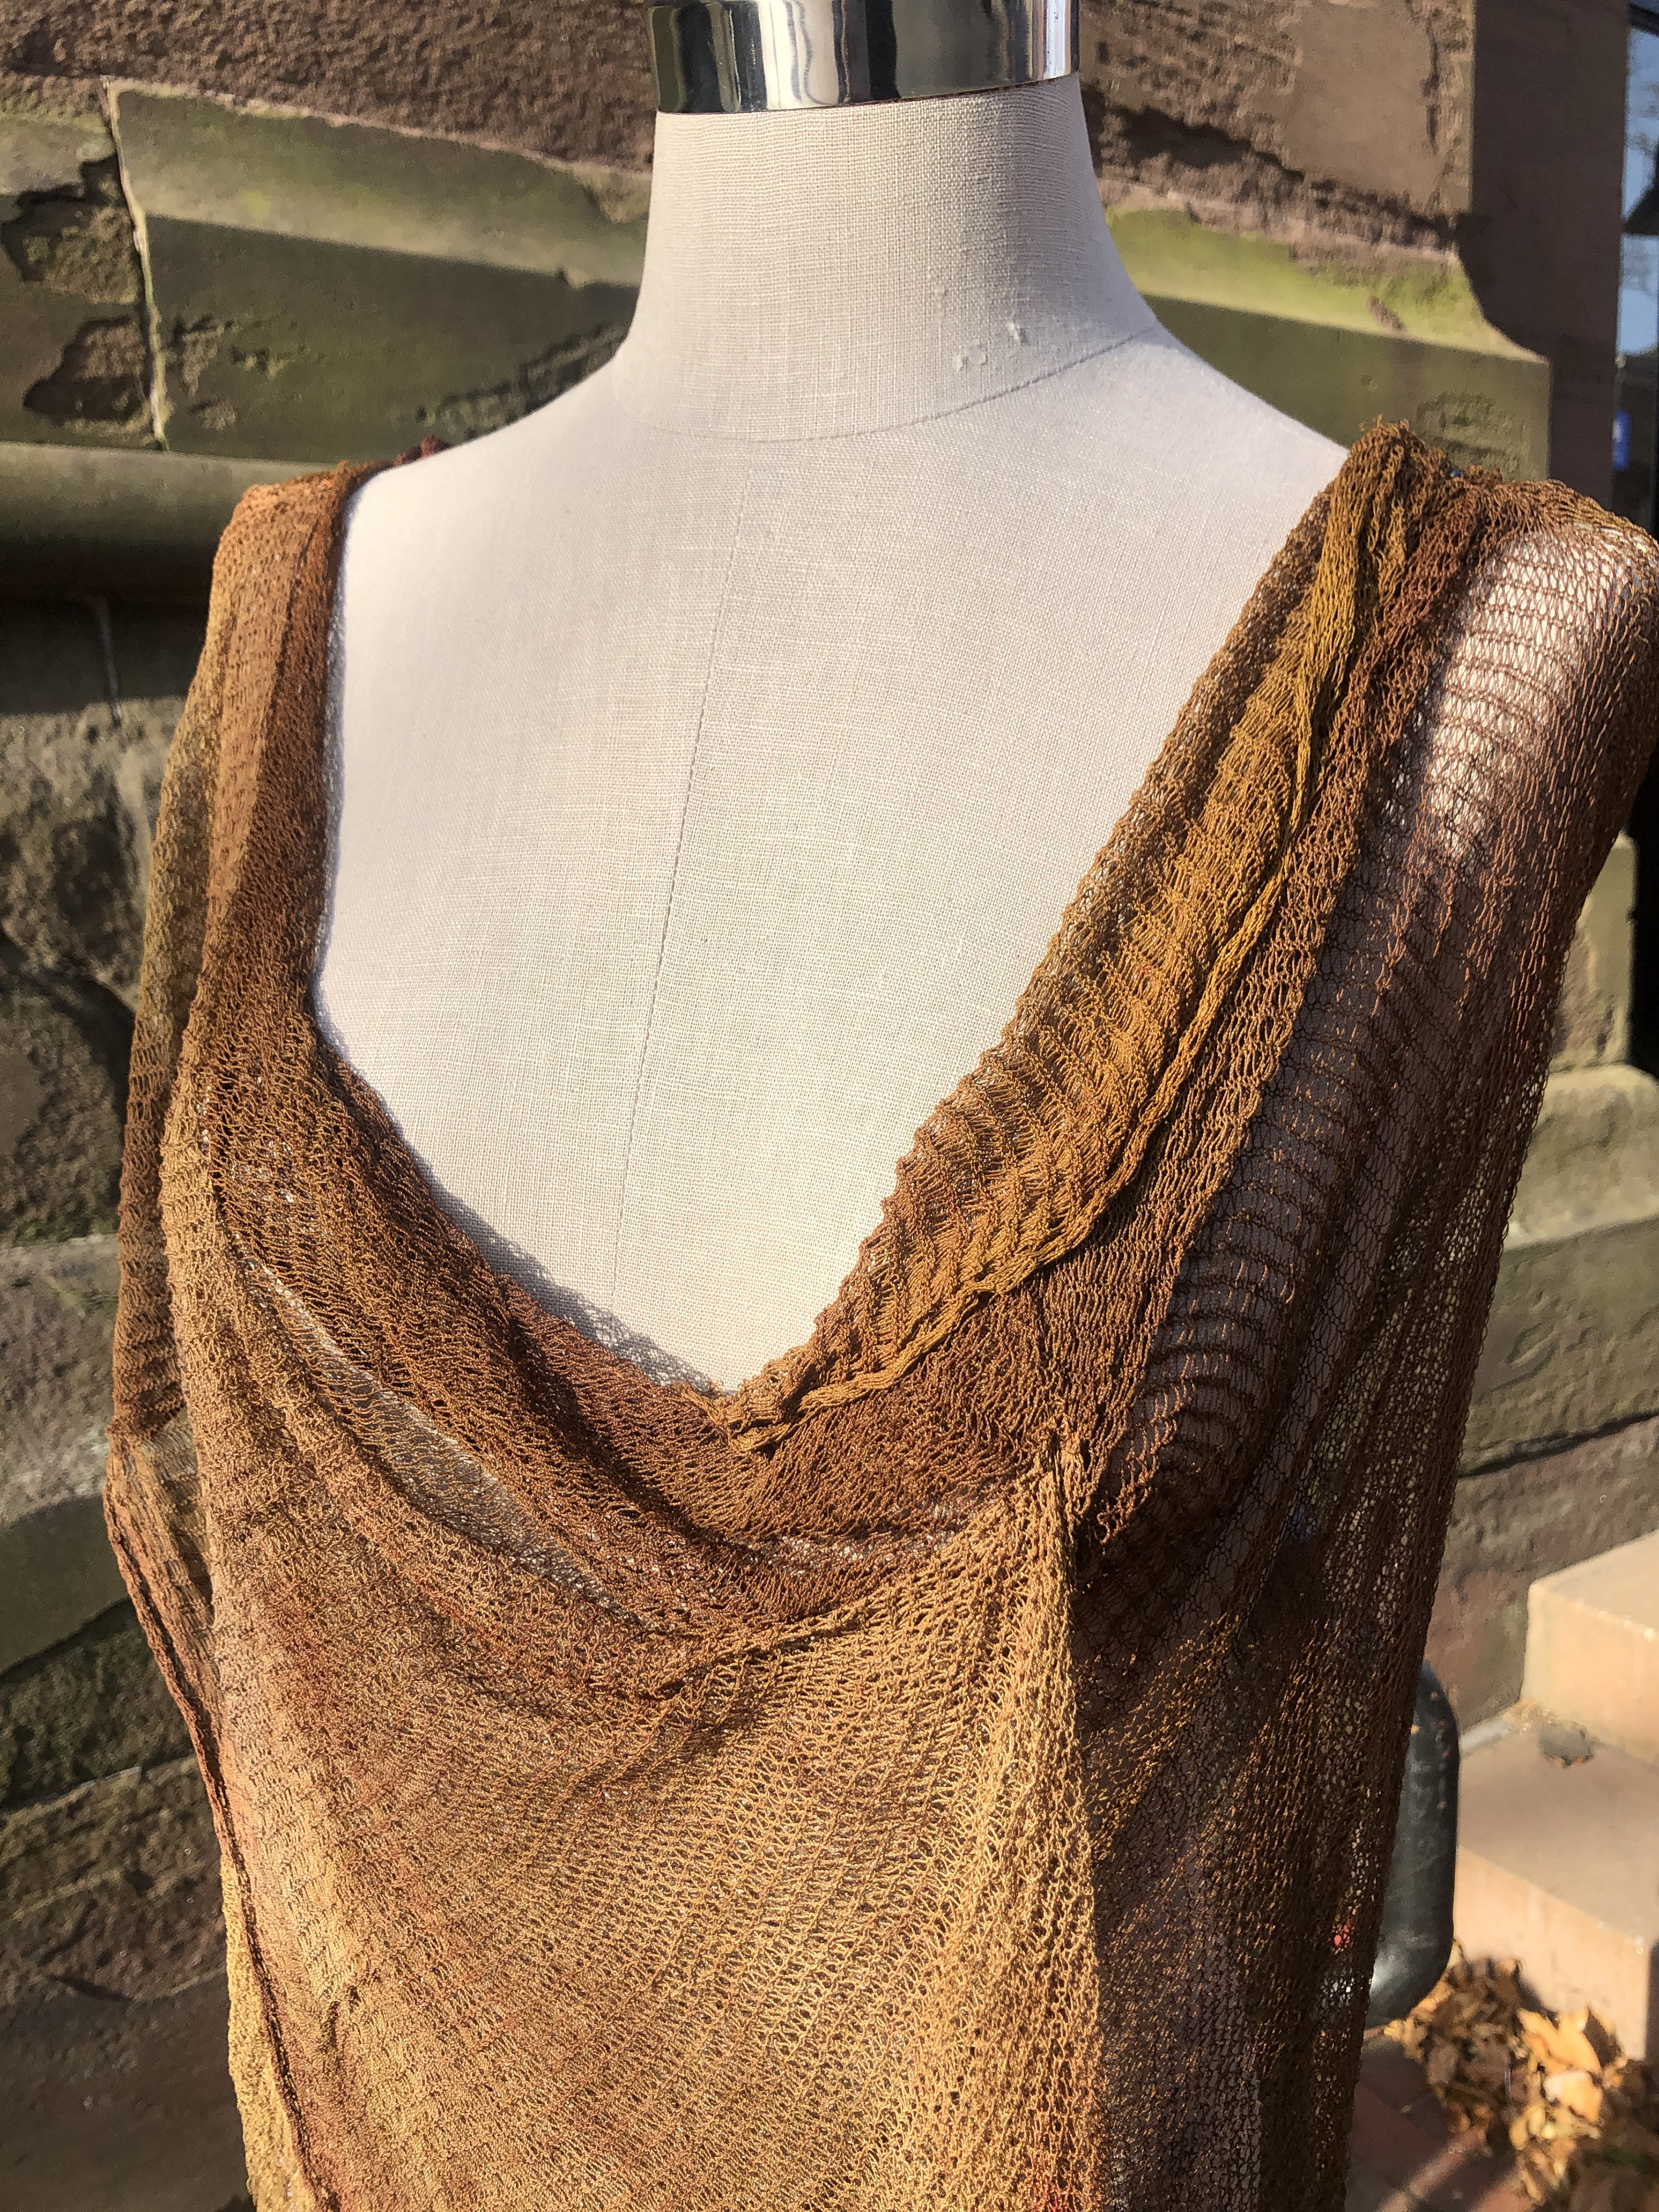 woven top on a body form